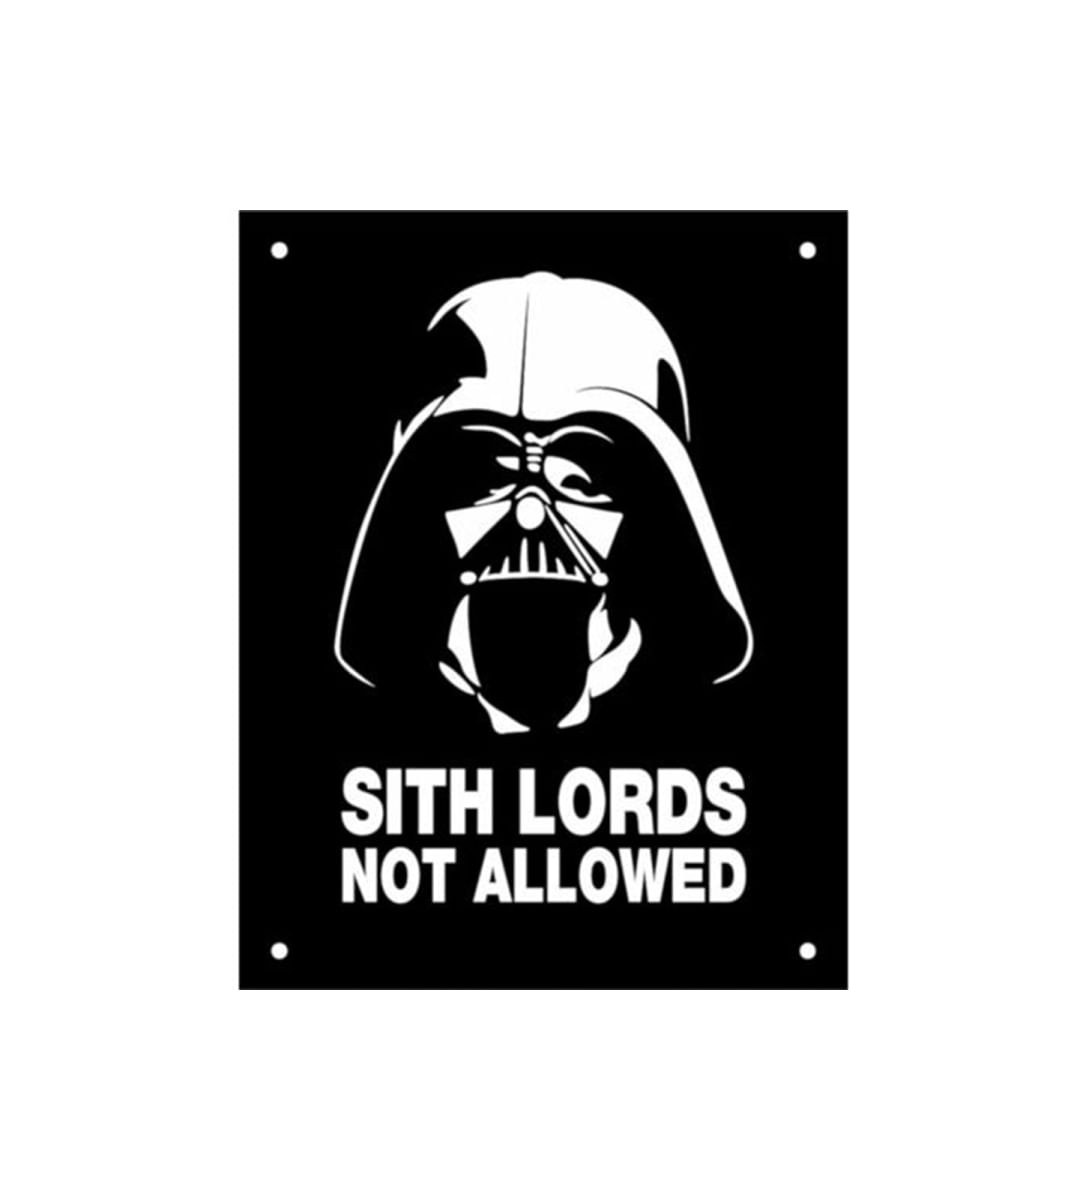 Placa Decorativa Sith Lords Not Allowed - Sinalize Placa Sith Lords Not Allowed Poli